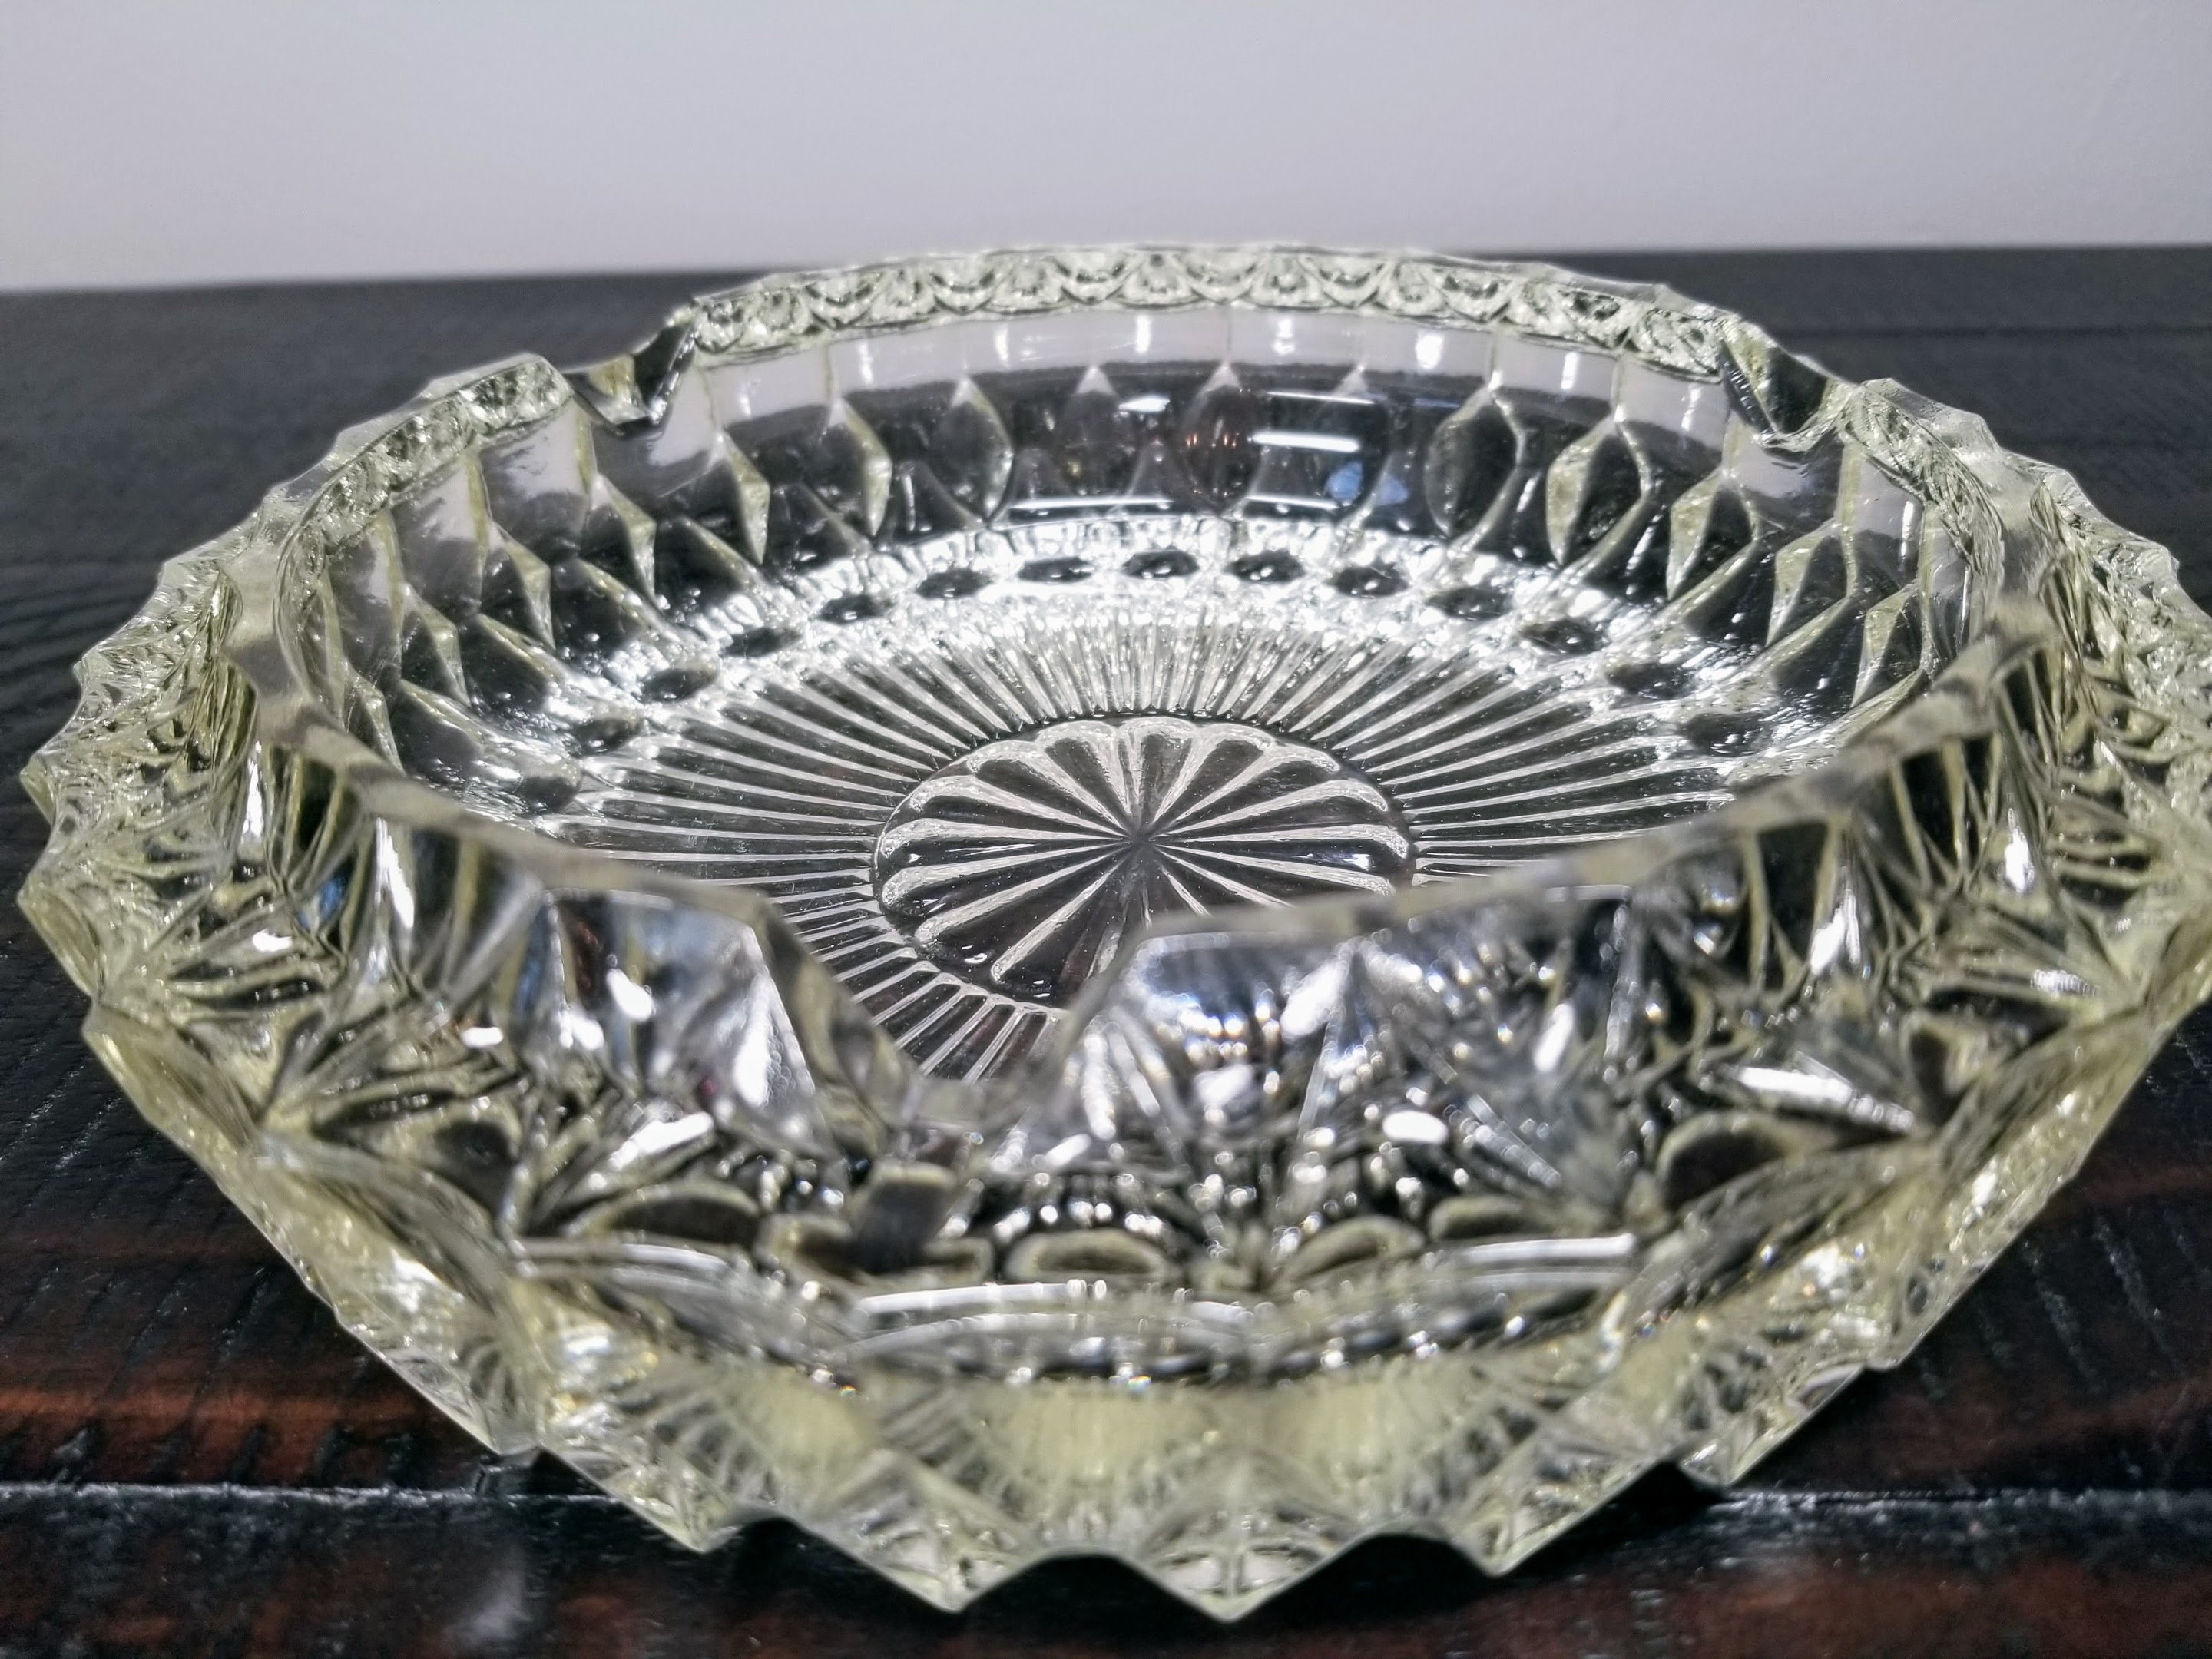 Vintage Glass Ashtray With Scalloped Edge and Starburst Design - Etsy